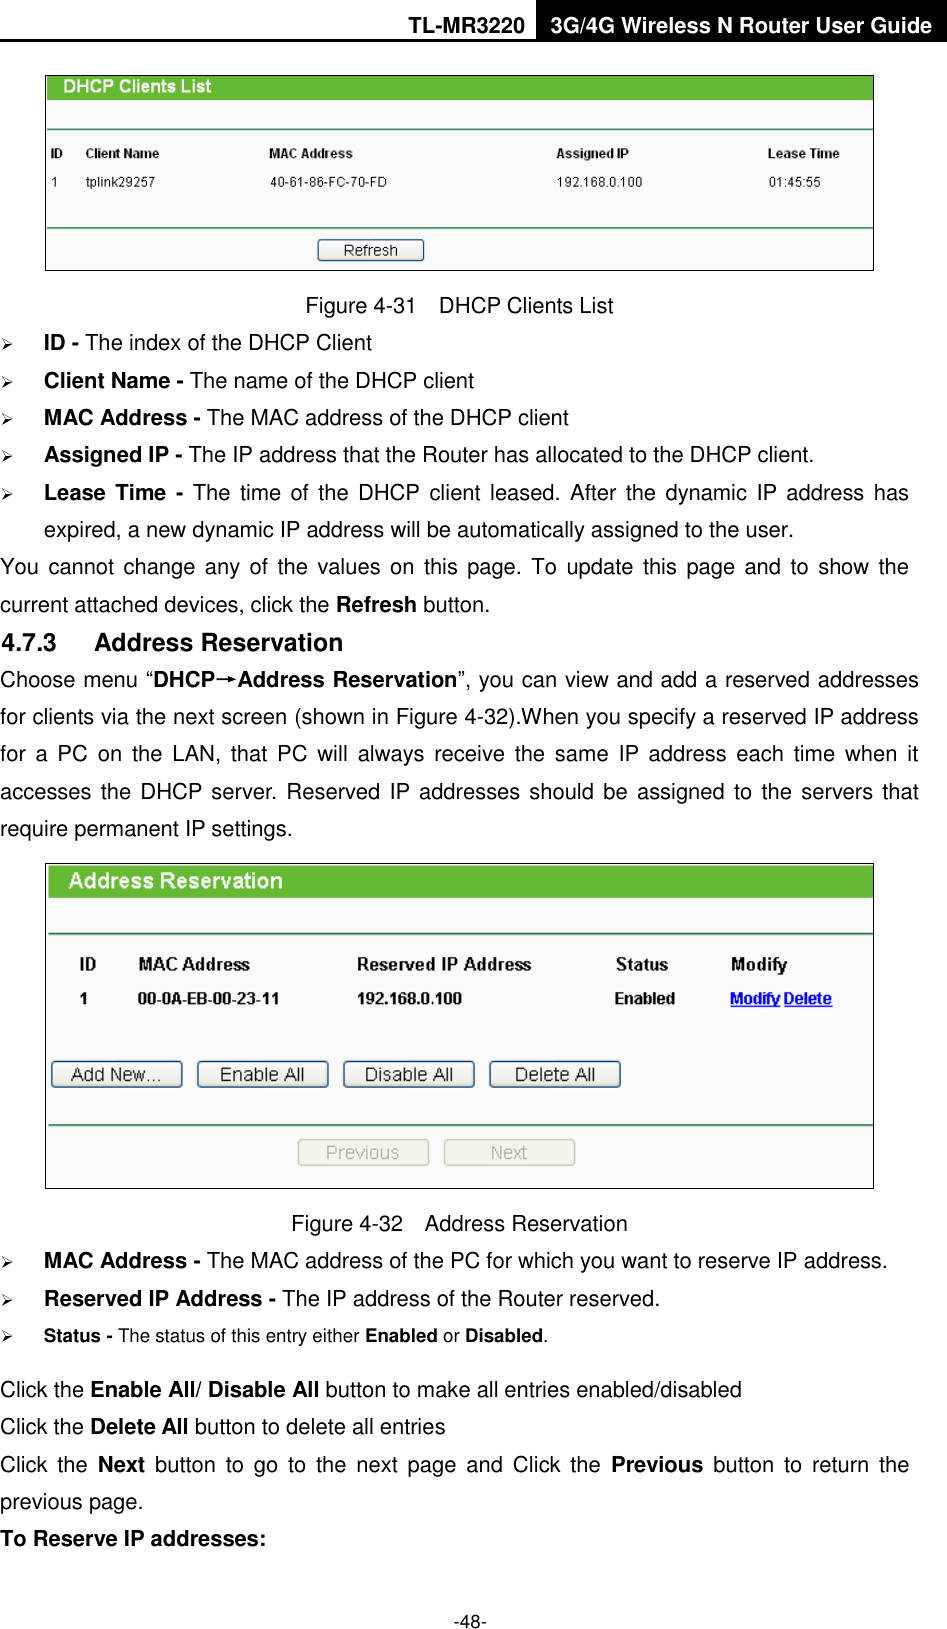 TL-MR3220 3G/4G Wireless N Router User Guide  -48-  Figure 4-31  DHCP Clients List  ID - The index of the DHCP Client    Client Name - The name of the DHCP client    MAC Address - The MAC address of the DHCP client    Assigned IP - The IP address that the Router has allocated to the DHCP client.  Lease Time - The  time of the DHCP client leased. After  the dynamic  IP address has expired, a new dynamic IP address will be automatically assigned to the user. You cannot  change any  of  the  values on  this page. To update this  page and  to show the current attached devices, click the Refresh button. 4.7.3  Address Reservation Choose menu “DHCP→Address Reservation”, you can view and add a reserved addresses for clients via the next screen (shown in Figure 4-32).When you specify a reserved IP address for  a  PC on  the  LAN,  that  PC  will  always receive the  same  IP  address each  time  when  it accesses the DHCP  server.  Reserved IP addresses should be  assigned to the servers that require permanent IP settings.    Figure 4-32  Address Reservation  MAC Address - The MAC address of the PC for which you want to reserve IP address.  Reserved IP Address - The IP address of the Router reserved.  Status - The status of this entry either Enabled or Disabled. Click the Enable All/ Disable All button to make all entries enabled/disabled Click the Delete All button to delete all entries Click  the  Next  button  to  go  to  the  next  page  and  Click  the  Previous  button  to  return  the previous page. To Reserve IP addresses:   